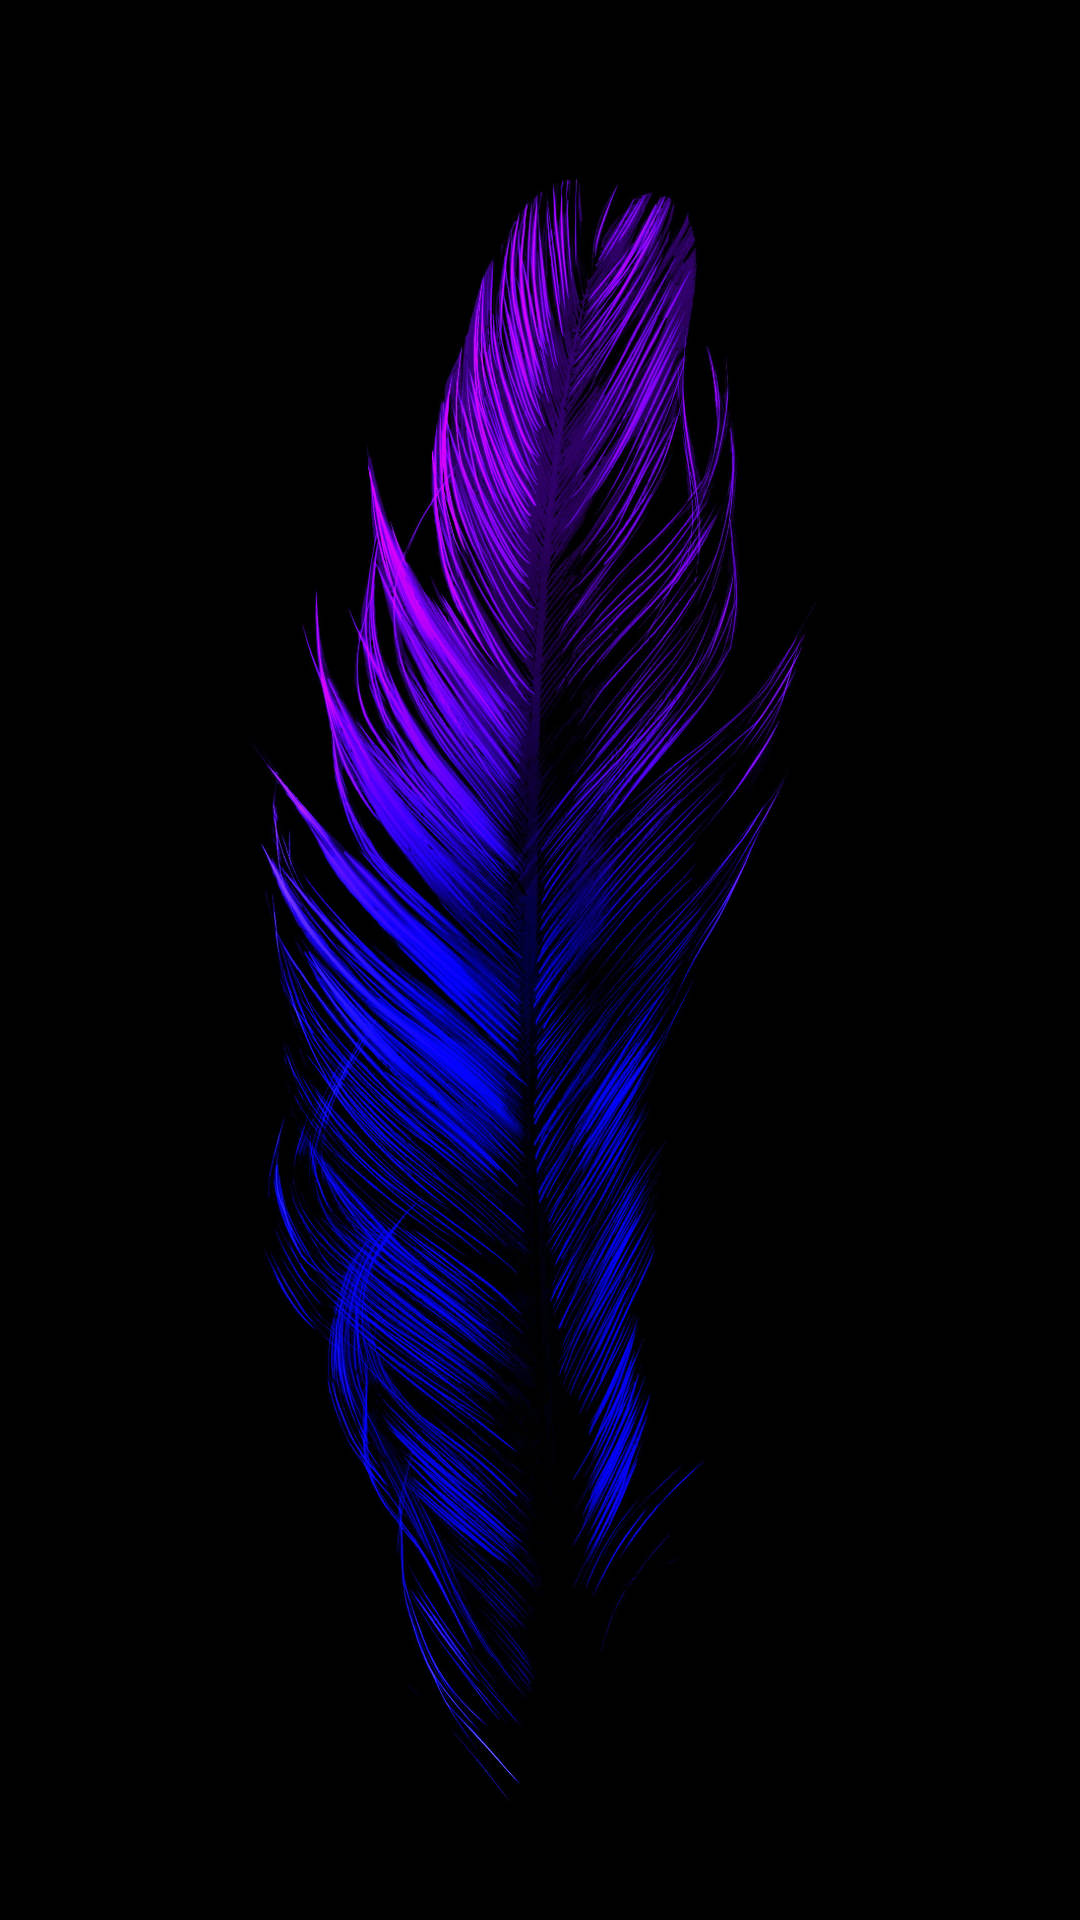 Download Blue, Black And Purple Aesthetic Feather Wallpaper 